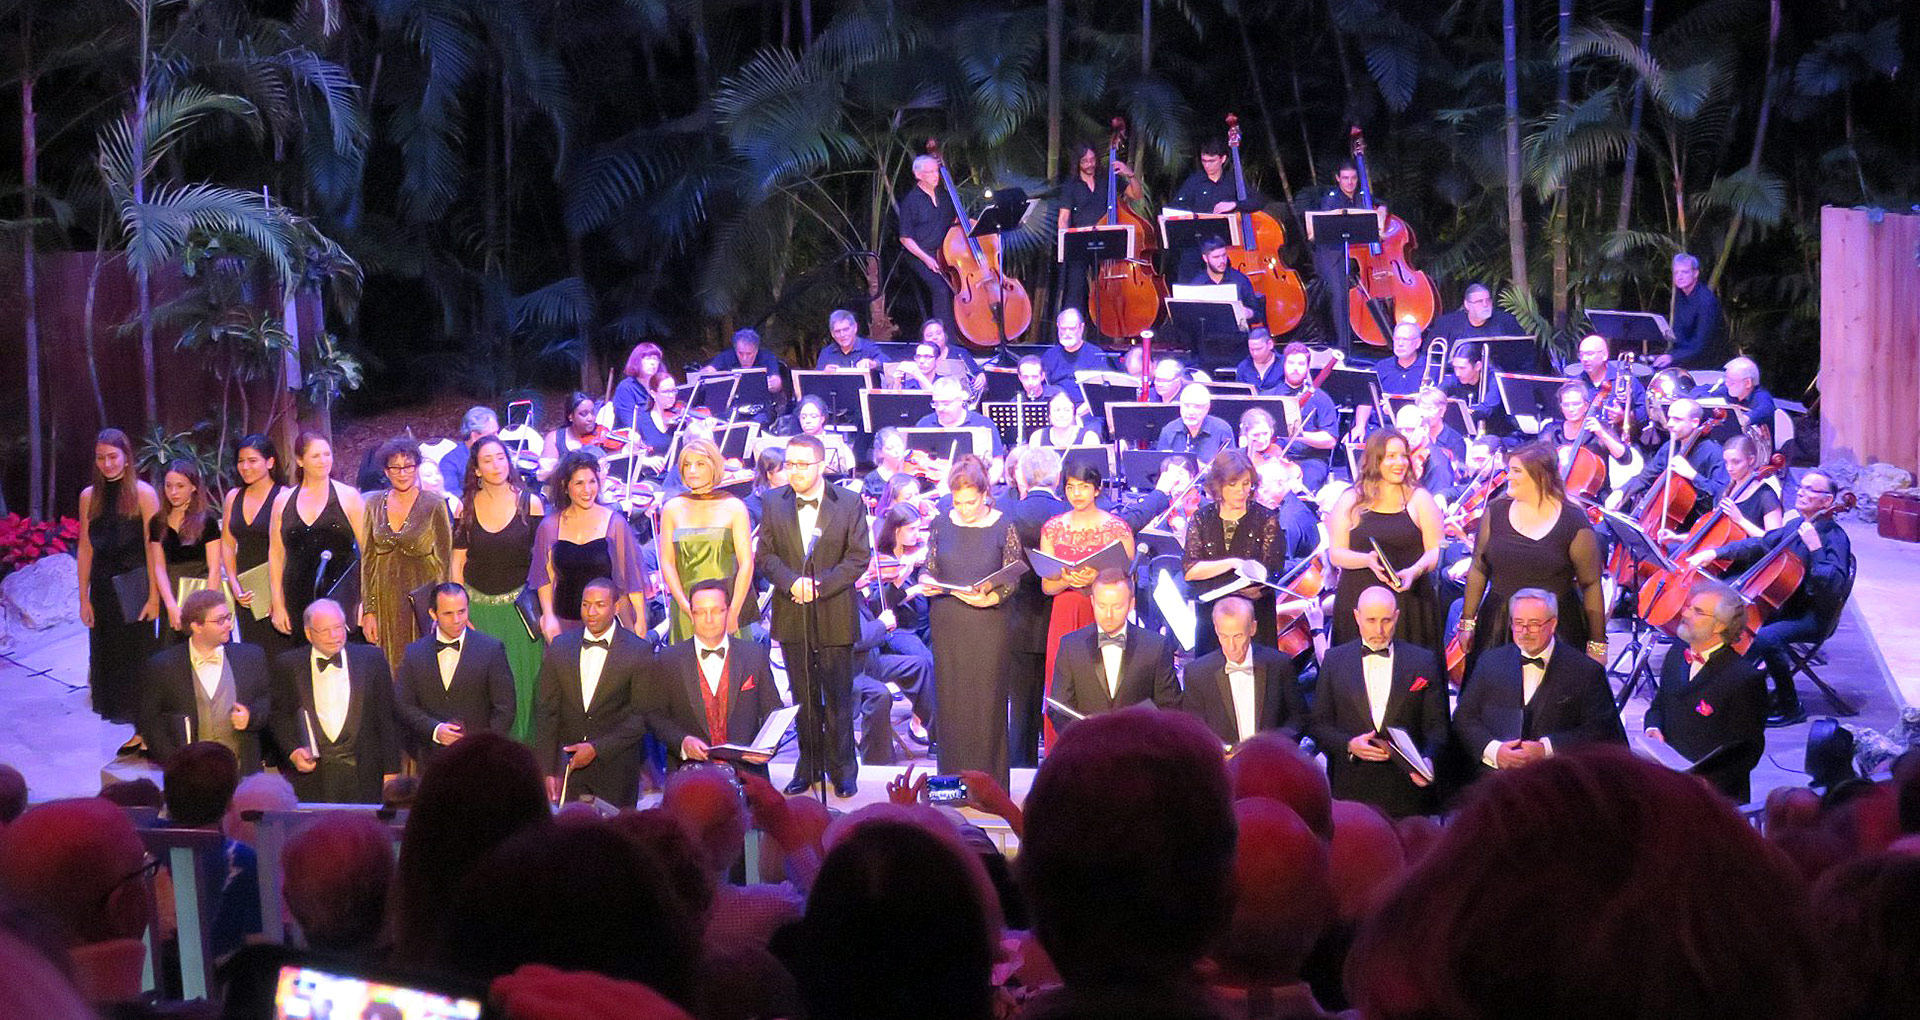 The Alhambra Orchestra At Pinecrest Gardens in Miami